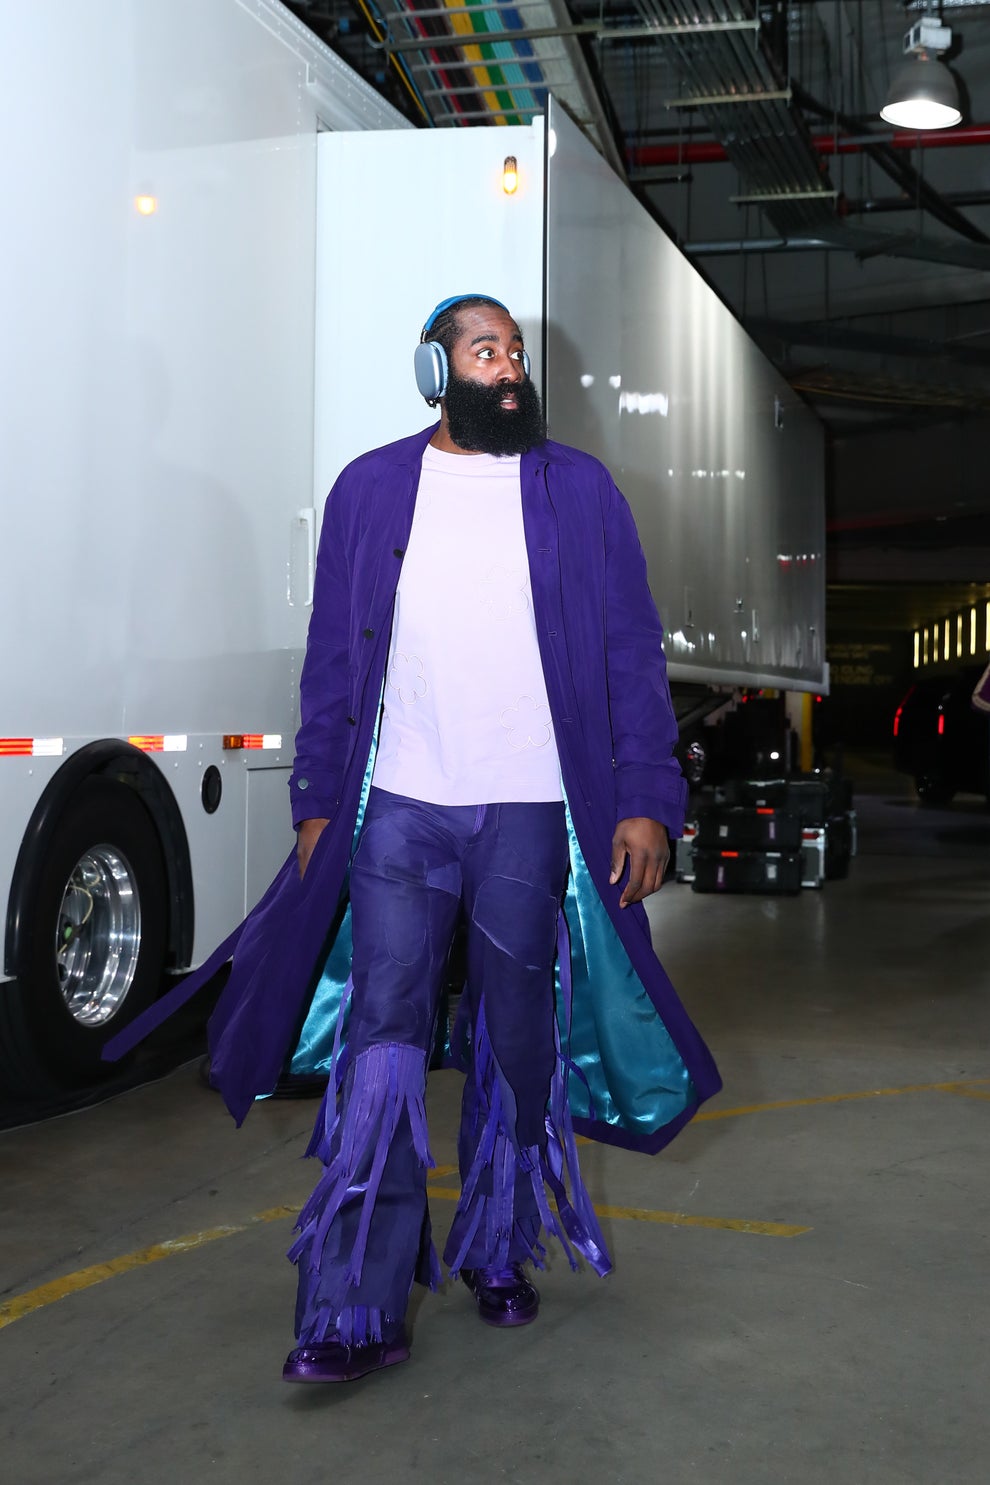 Look: James Harden rocks awesome Christmas-themed suit, shorts before game  - The Sports Daily